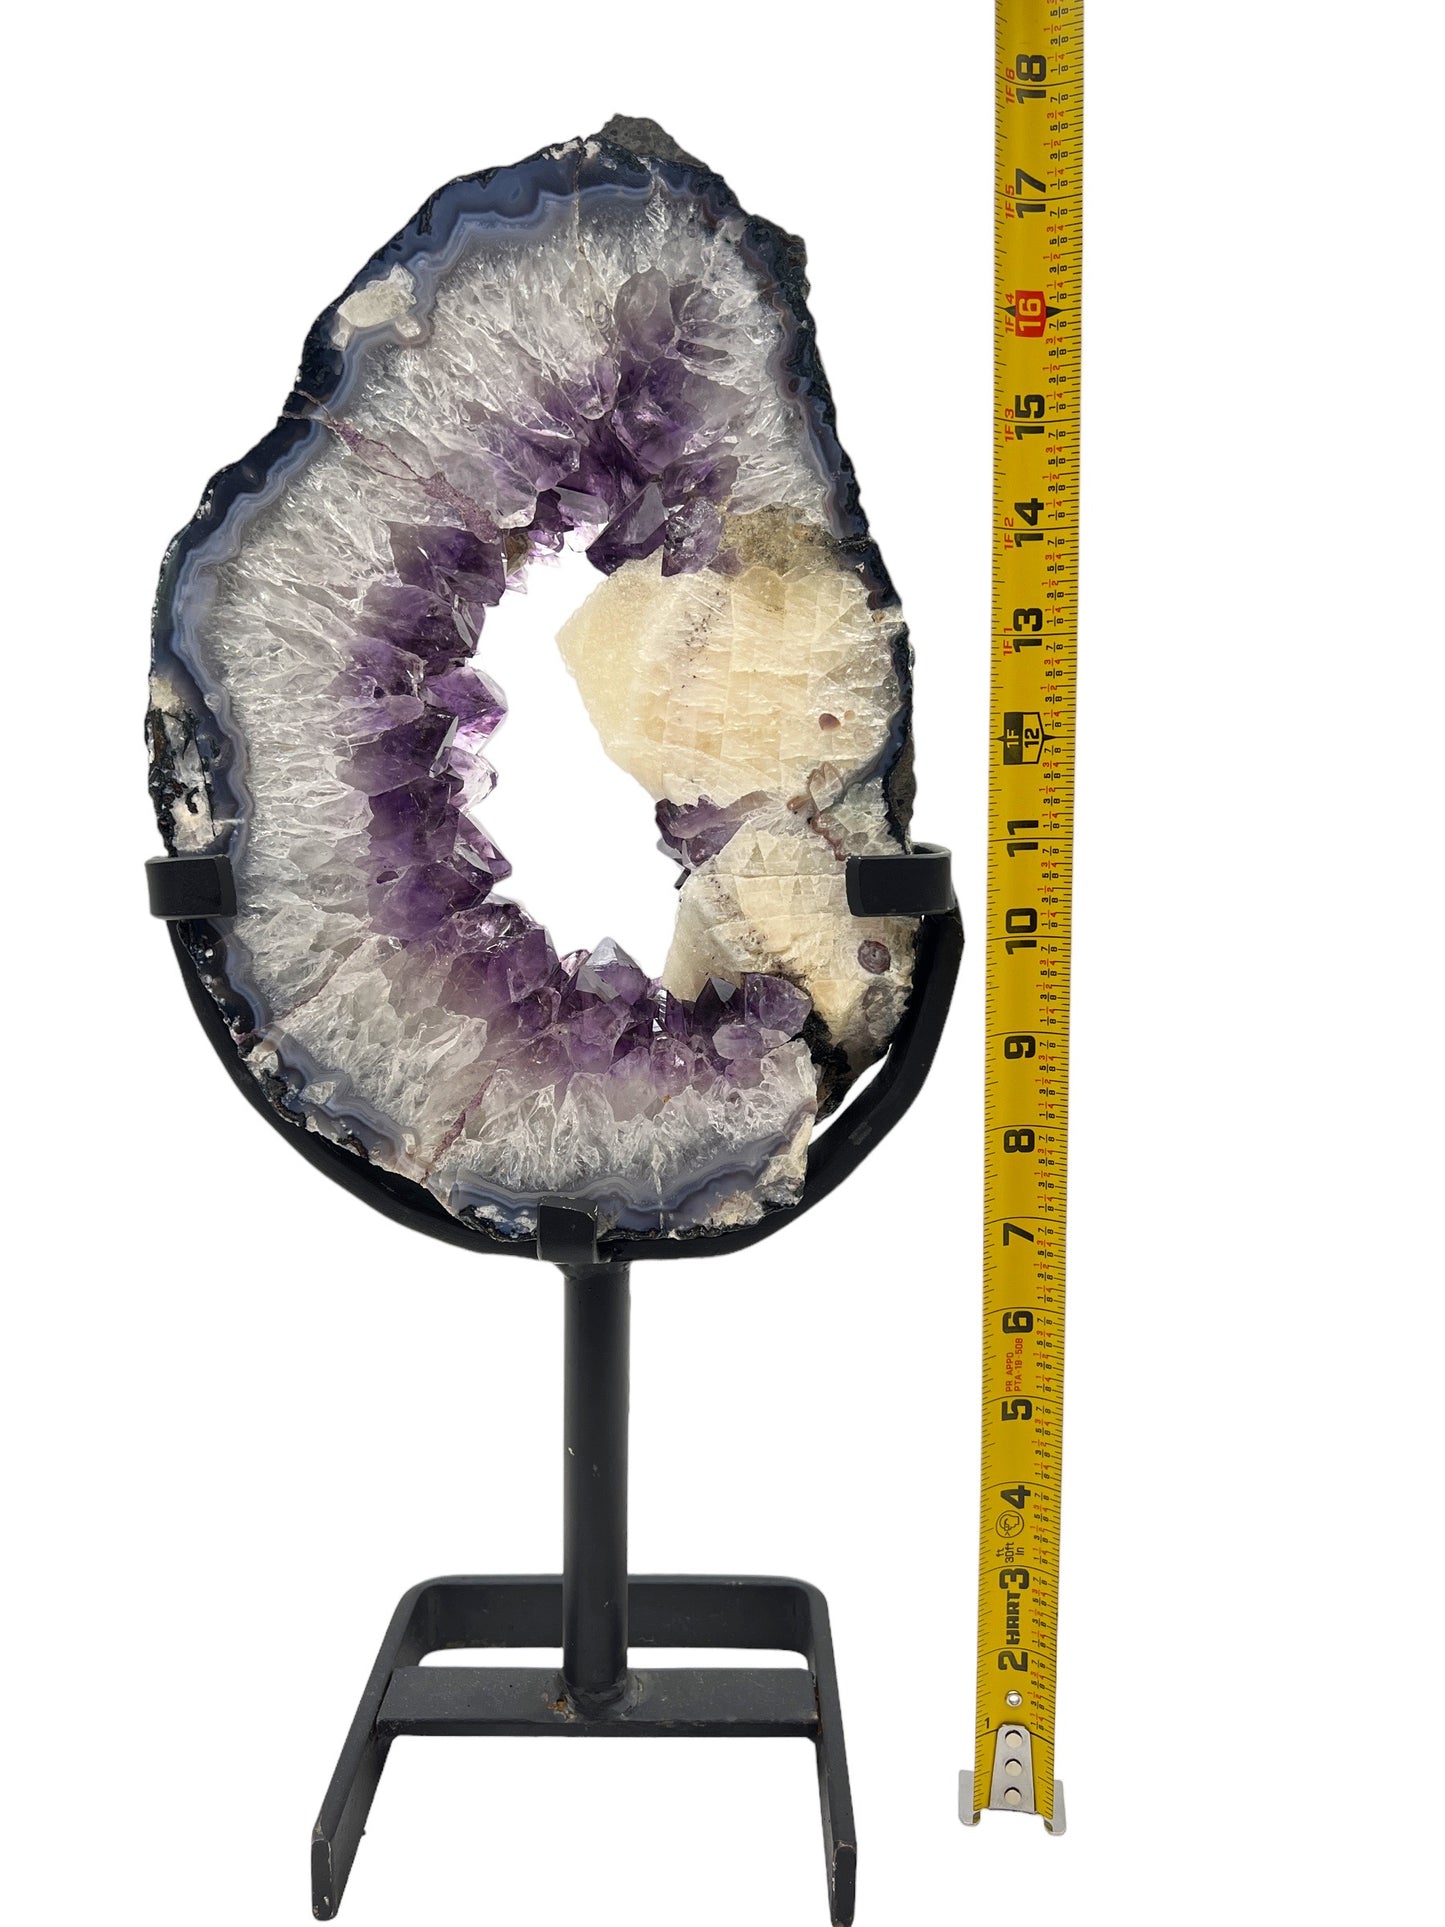 Amethyst on stand #16